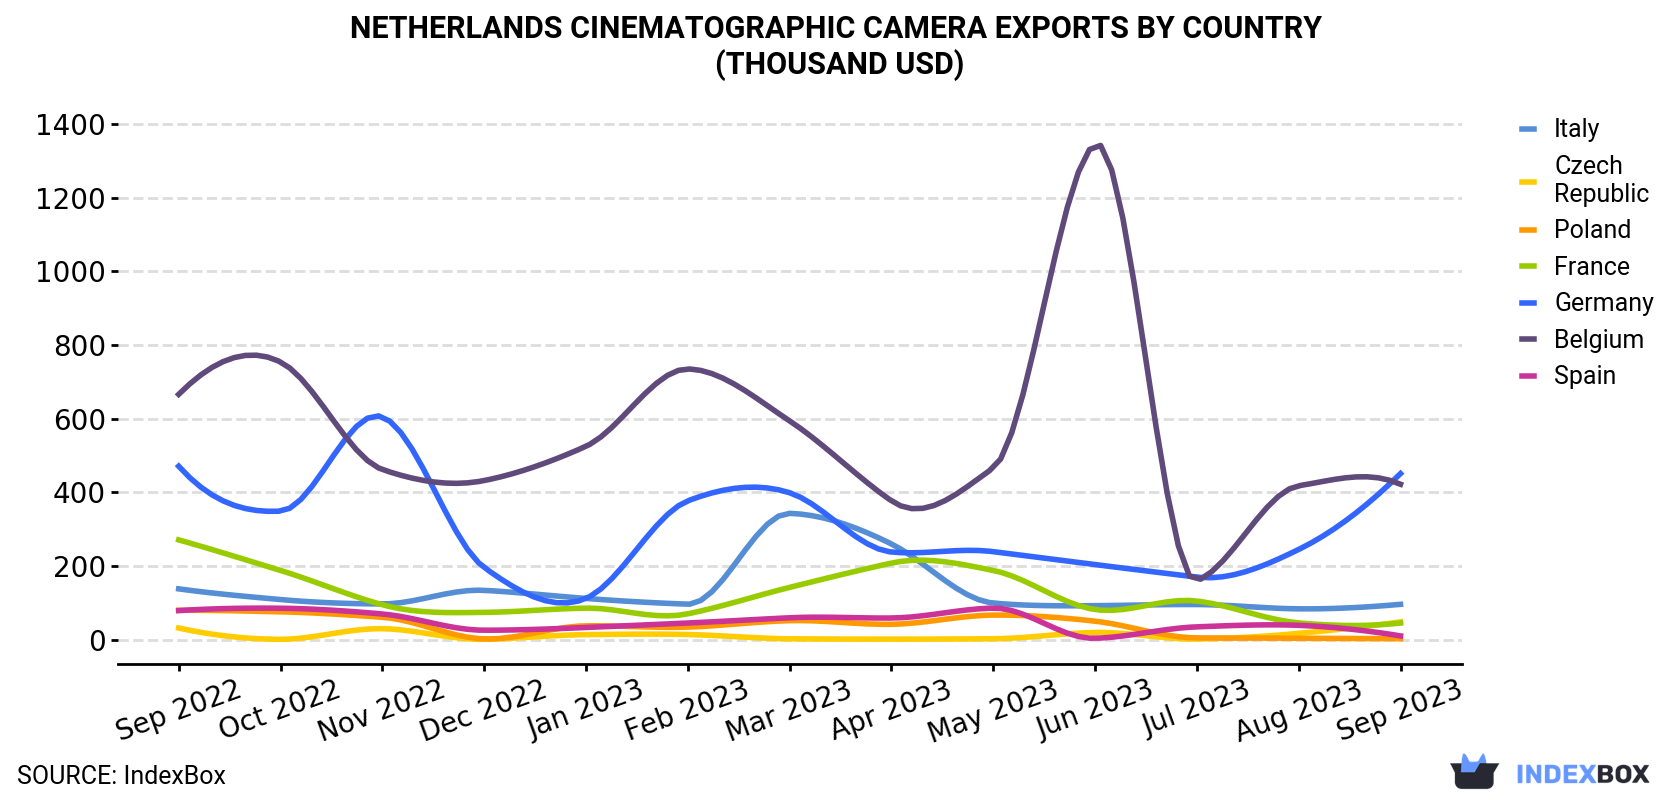 Netherlands Cinematographic Camera Exports By Country (Thousand USD)